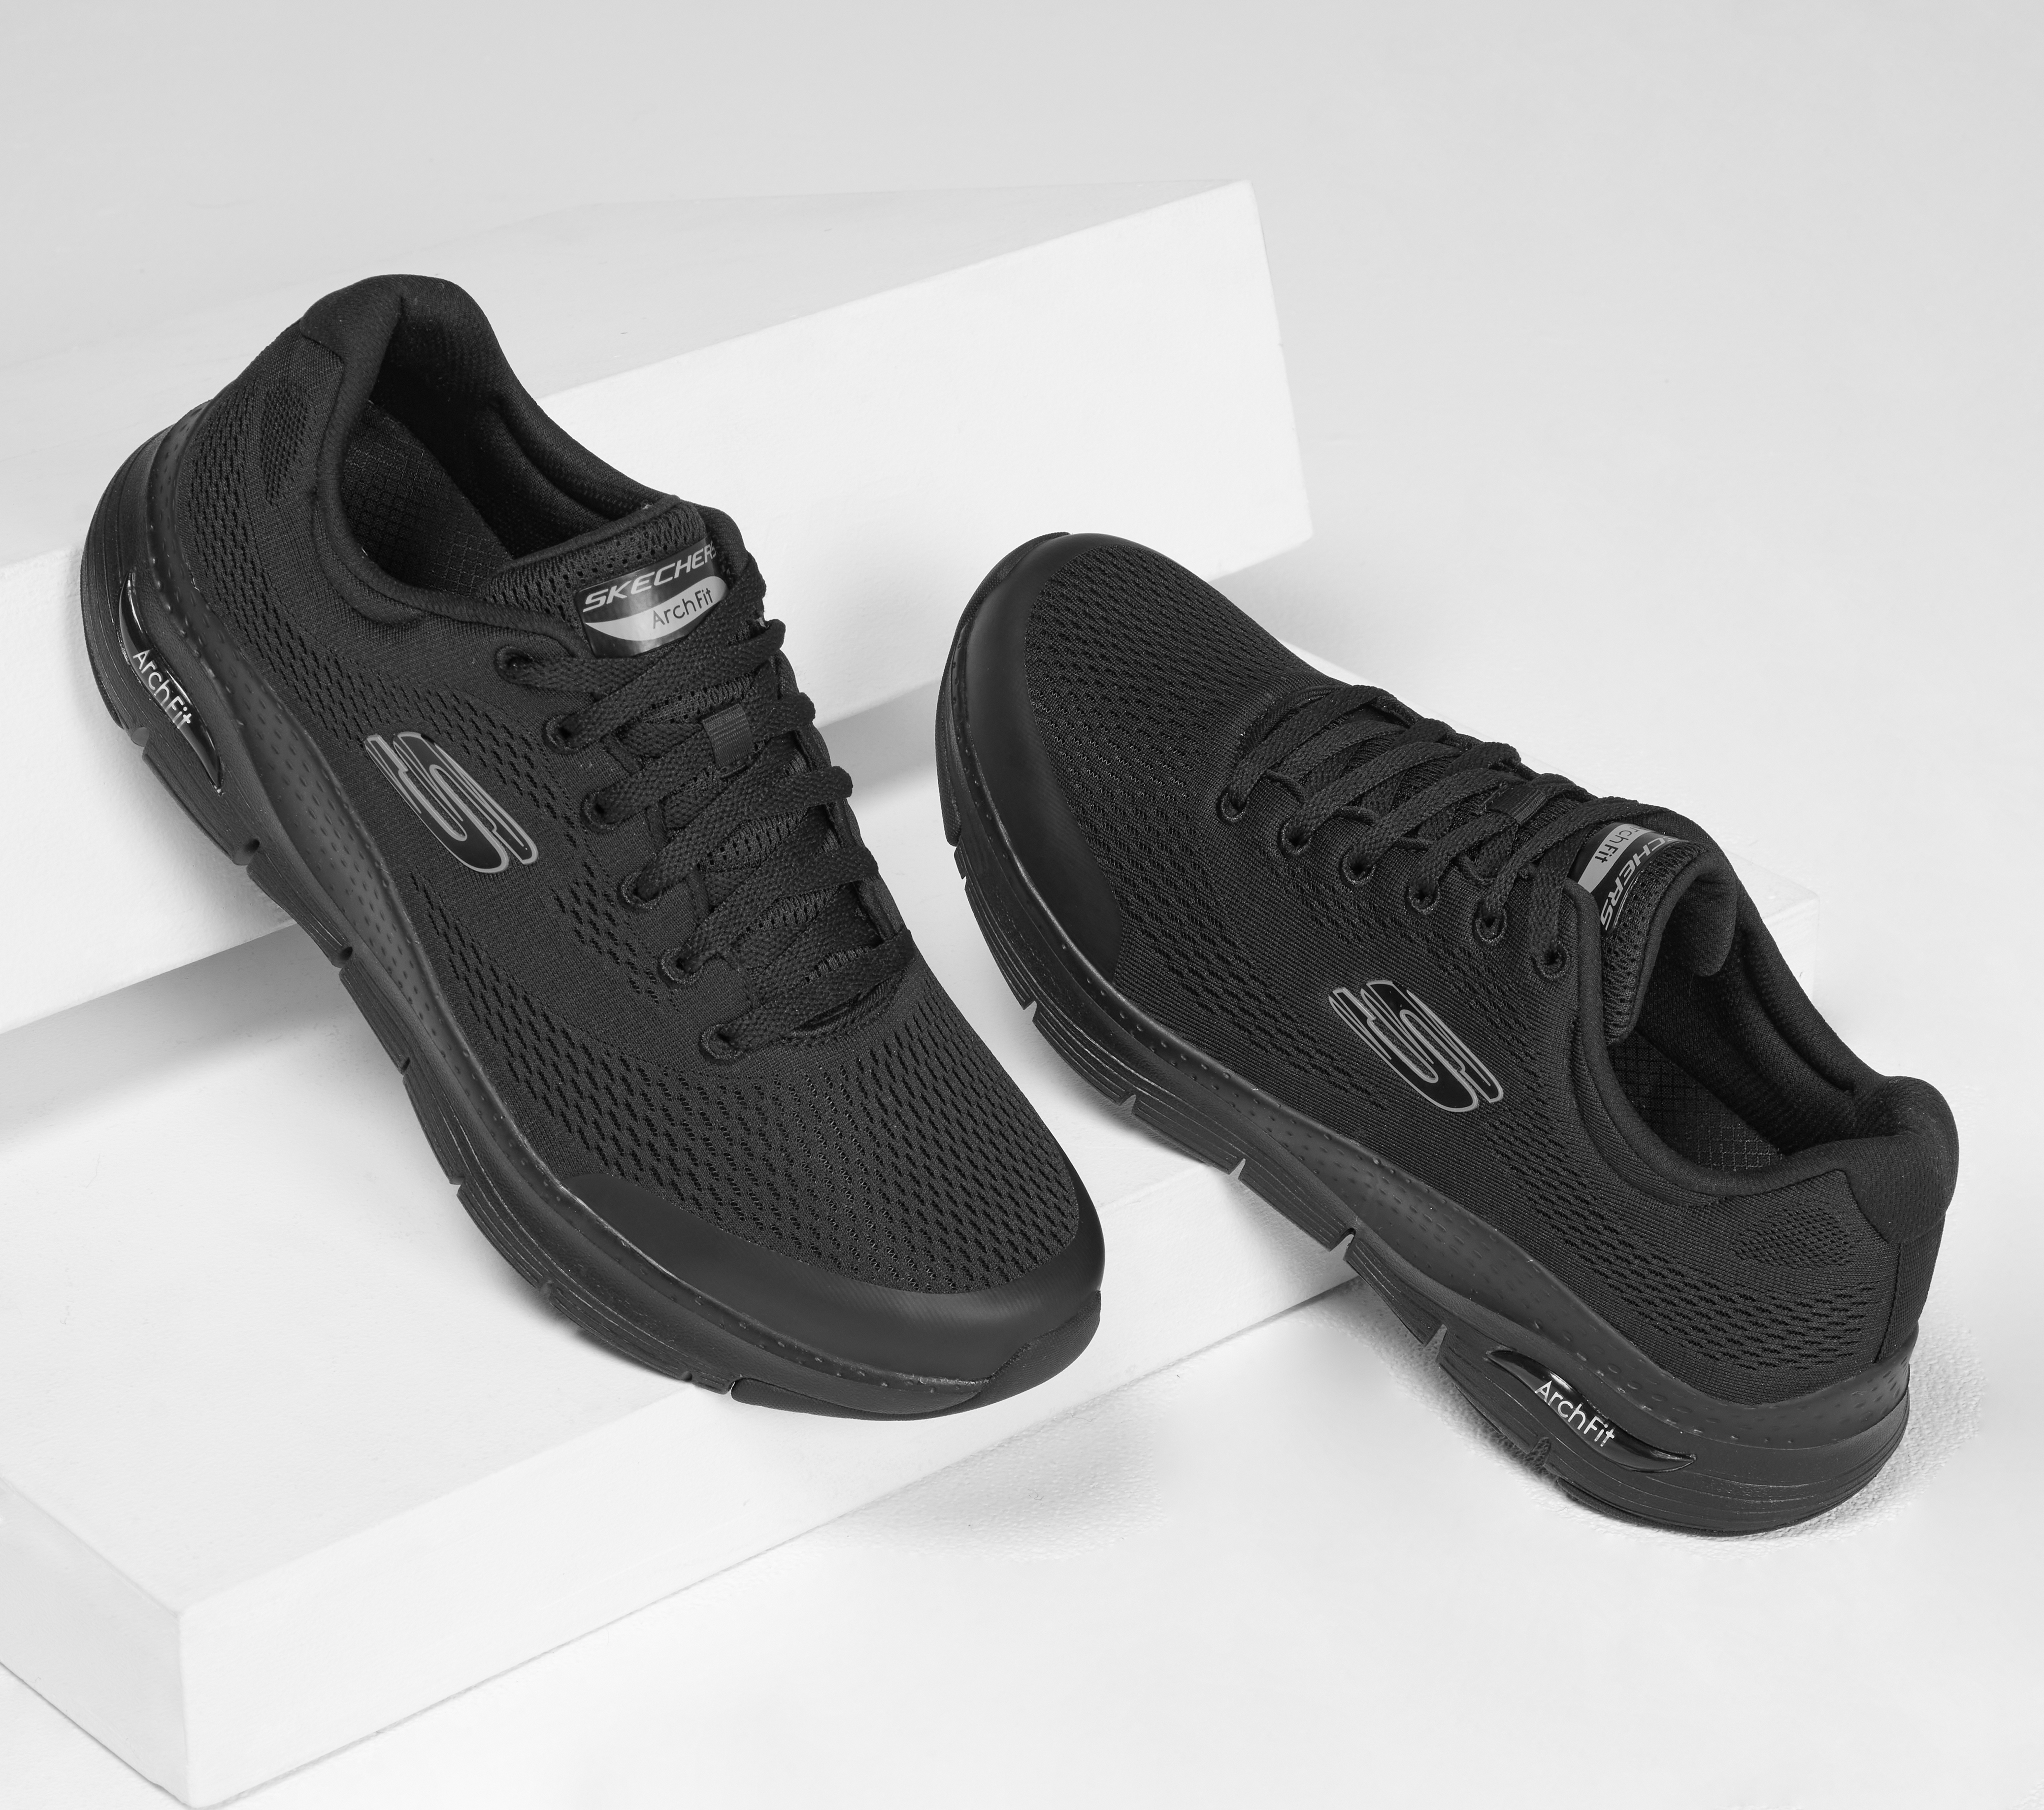 Where Can I Find Skechers Arch Fit?